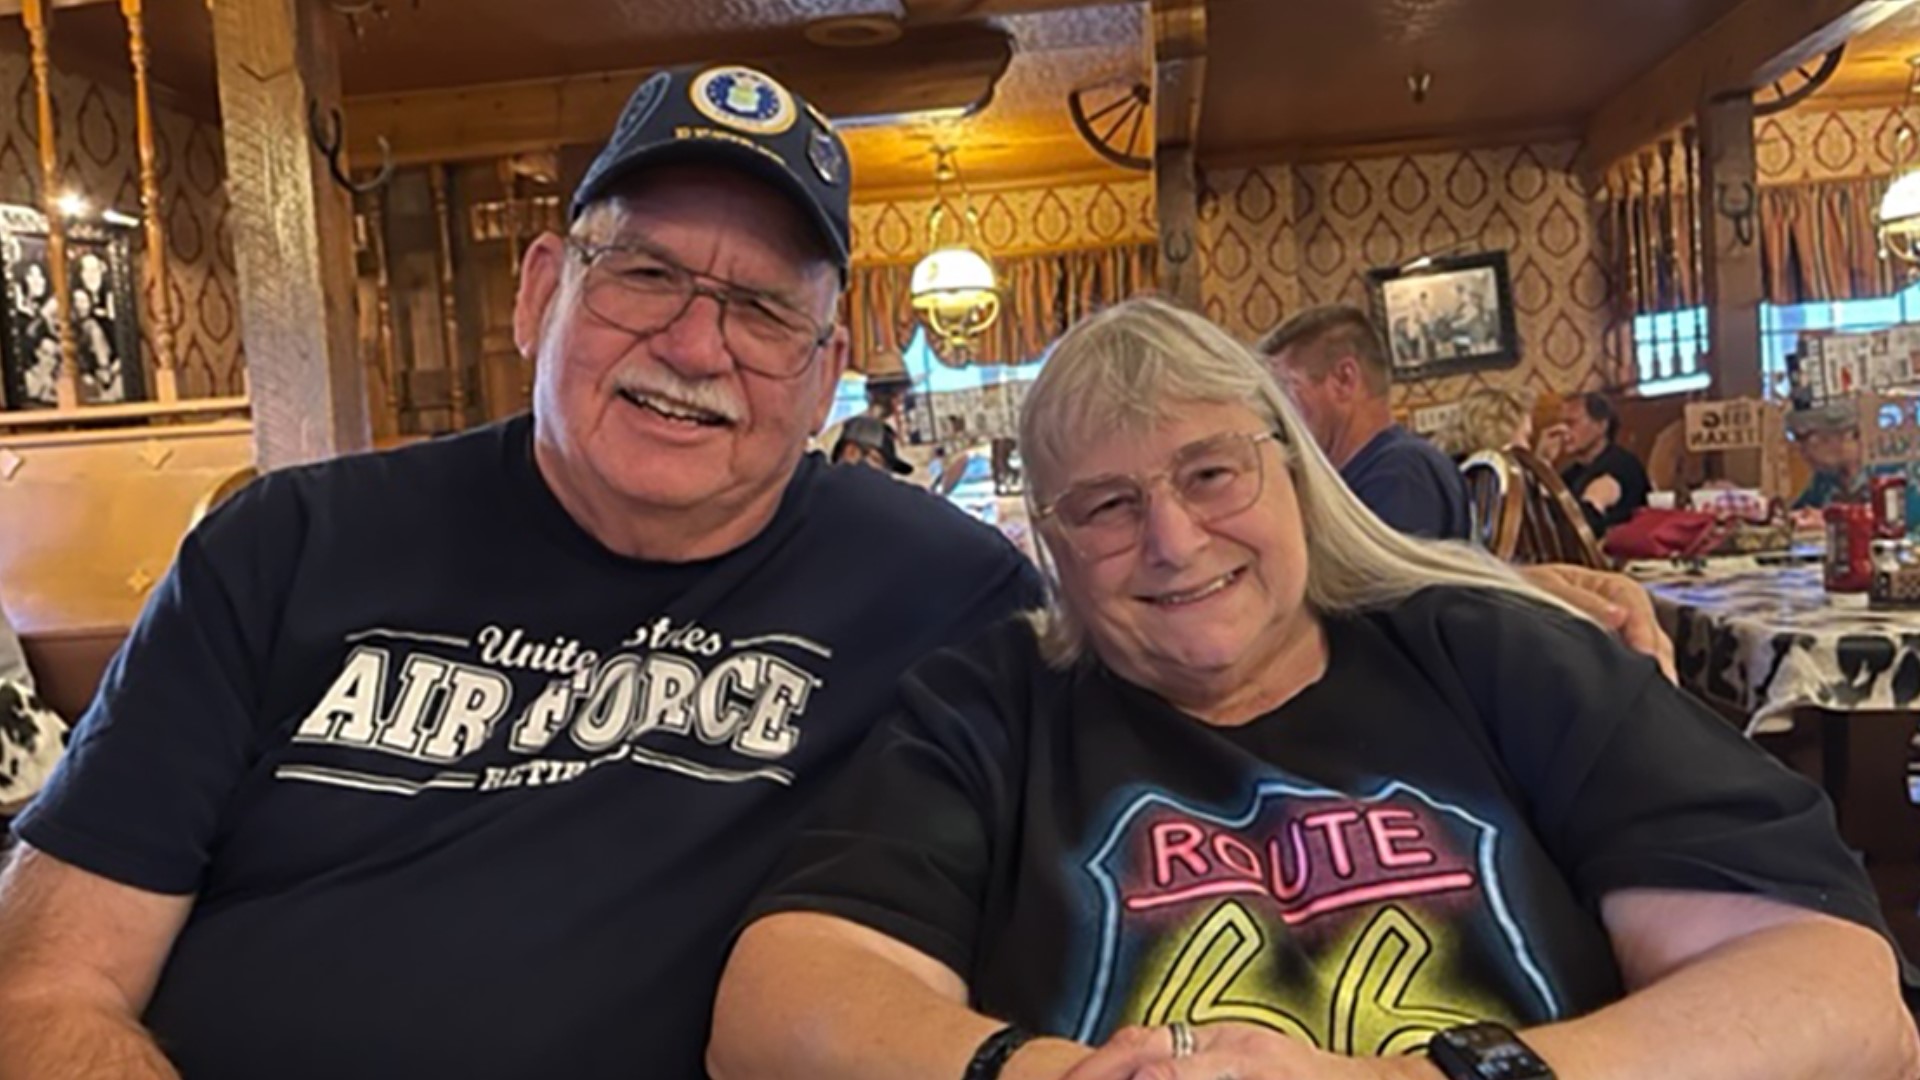 A relative of Ronnie Barker says "friends, family and strangers" are welcome to participate in a procession to a funeral home Friday afternoon.